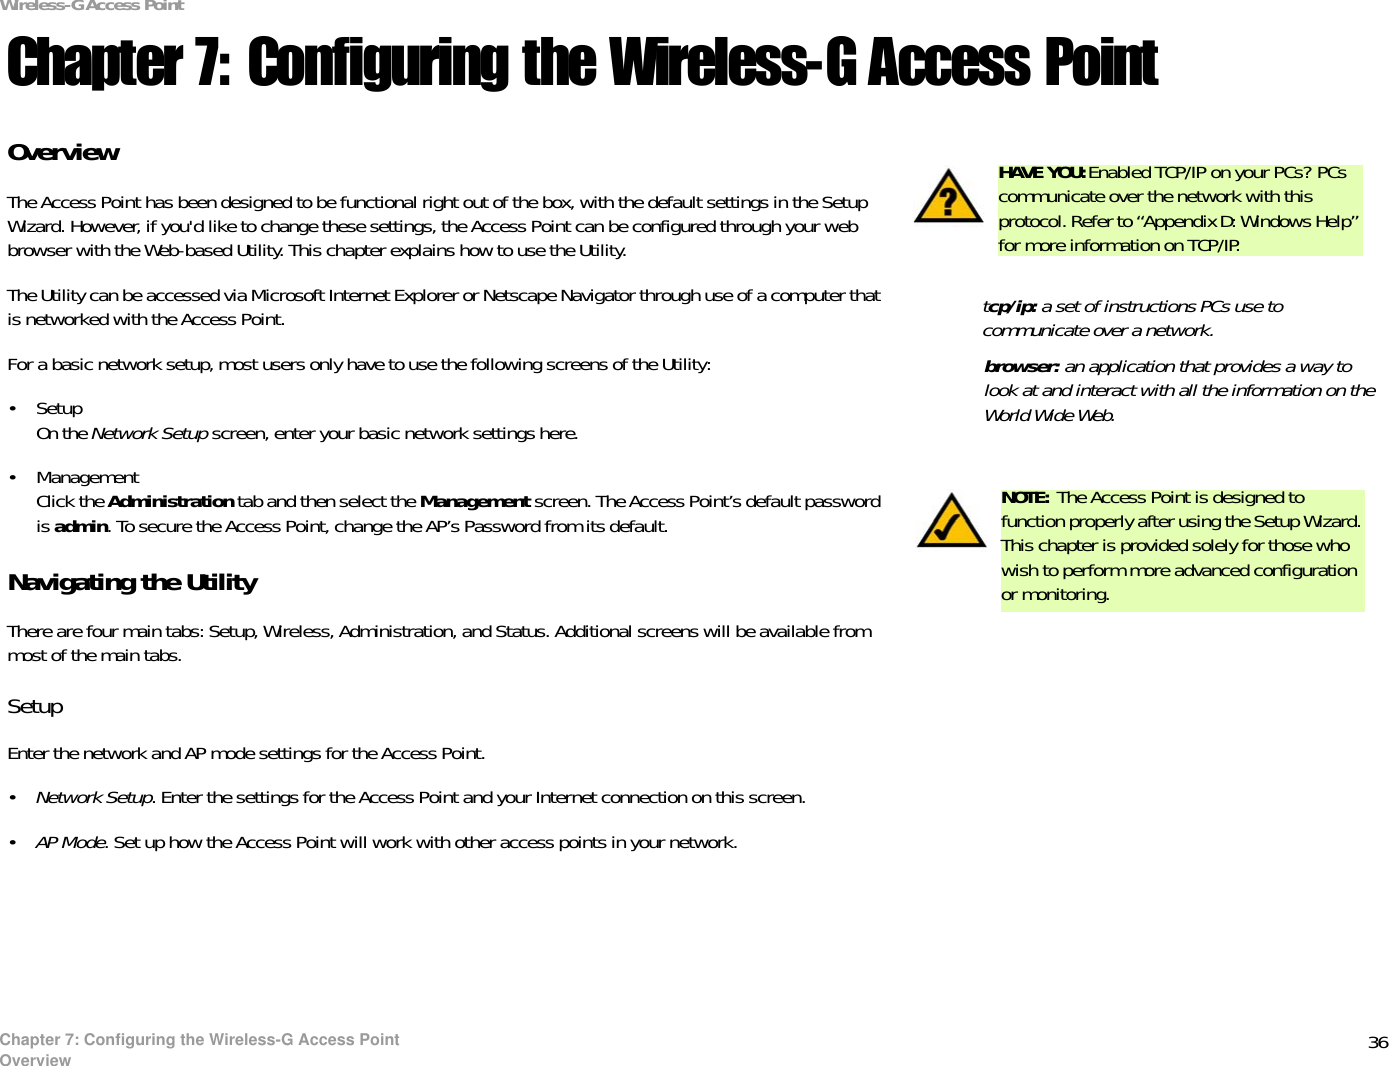 36Chapter 7: Configuring the Wireless-G Access PointOverviewWireless-G Access PointChapter 7: Configuring the Wireless-G Access PointOverviewThe Access Point has been designed to be functional right out of the box, with the default settings in the Setup Wizard. However, if you&apos;d like to change these settings, the Access Point can be configured through your web browser with the Web-based Utility. This chapter explains how to use the Utility.The Utility can be accessed via Microsoft Internet Explorer or Netscape Navigator through use of a computer that is networked with the Access Point.For a basic network setup, most users only have to use the following screens of the Utility:• SetupOn the Network Setup screen, enter your basic network settings here.• ManagementClick the Administration tab and then select the Management screen. The Access Point’s default password is admin. To secure the Access Point, change the AP’s Password from its default.Navigating the UtilityThere are four main tabs: Setup, Wireless, Administration, and Status. Additional screens will be available from most of the main tabs.SetupEnter the network and AP mode settings for the Access Point.•Network Setup. Enter the settings for the Access Point and your Internet connection on this screen.•AP Mode. Set up how the Access Point will work with other access points in your network.HAVE YOU:Enabled TCP/IP on your PCs? PCs communicate over the network with this protocol. Refer to “Appendix D: Windows Help” for more information on TCP/IP.NOTE: The Access Point is designed to function properly after using the Setup Wizard. This chapter is provided solely for those who wish to perform more advanced configuration or monitoring.browser: an application that provides a way to look at and interact with all the information on the World Wide Web. tcp/ip: a set of instructions PCs use to communicate over a network.